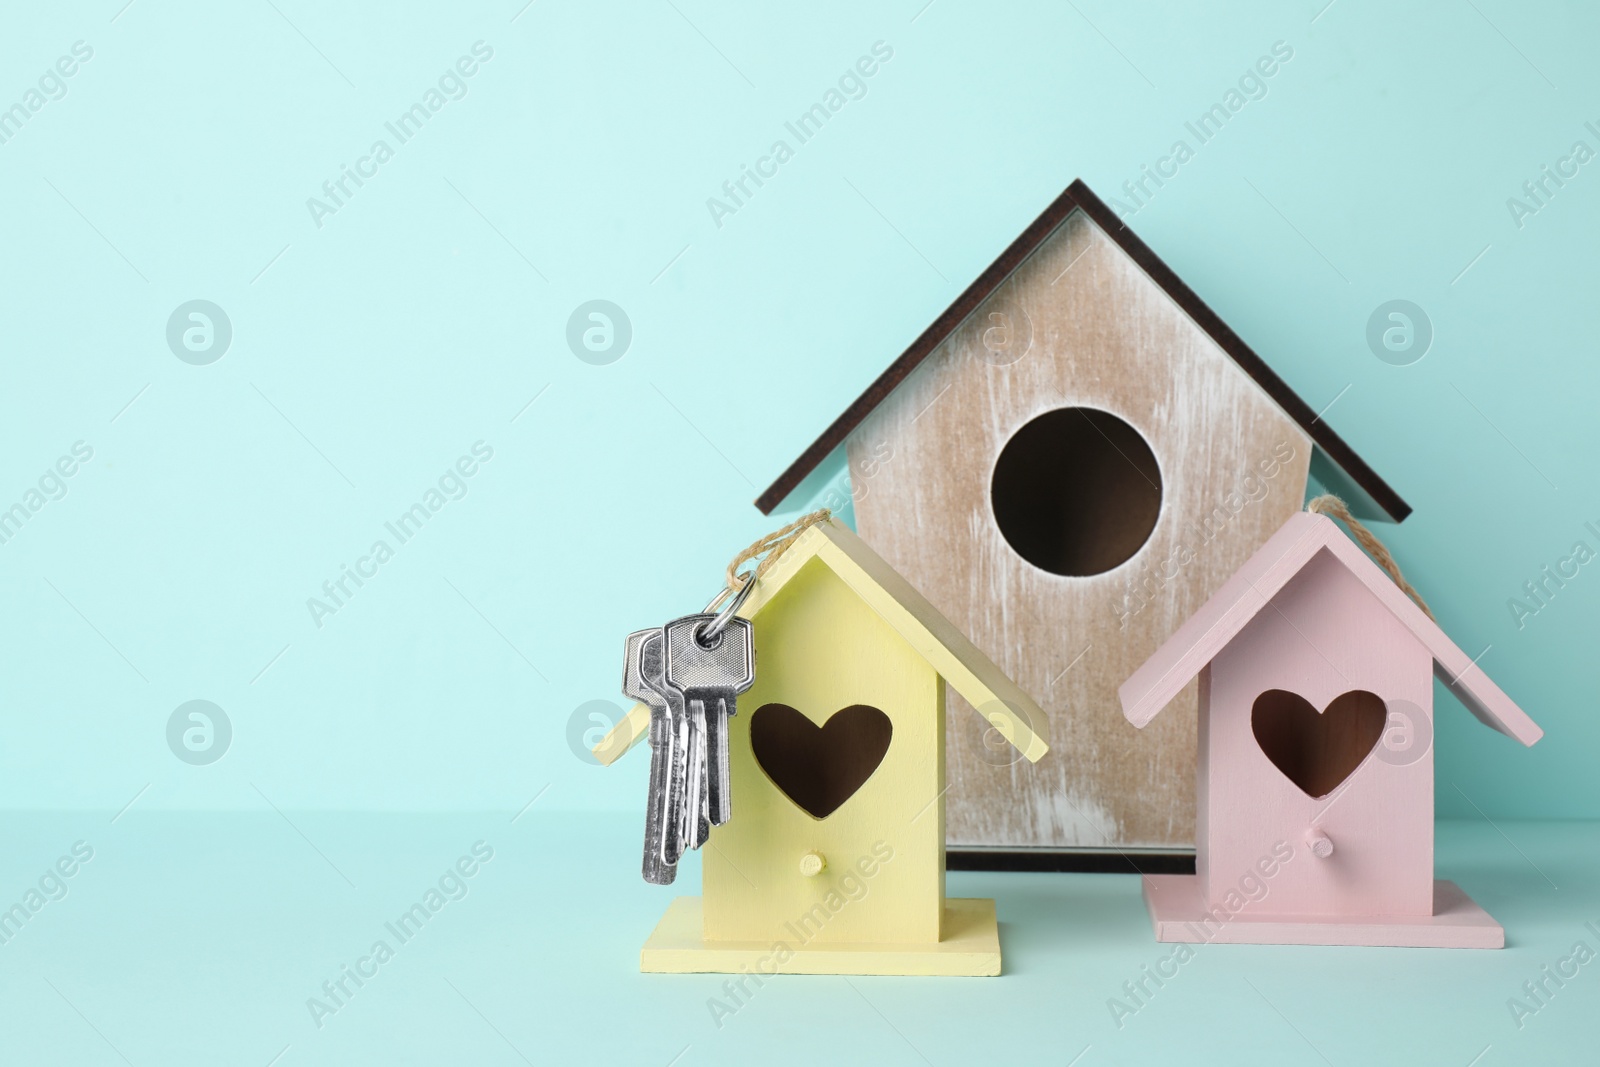 Photo of Decorative bird houses and keys on light blue background. Space for text